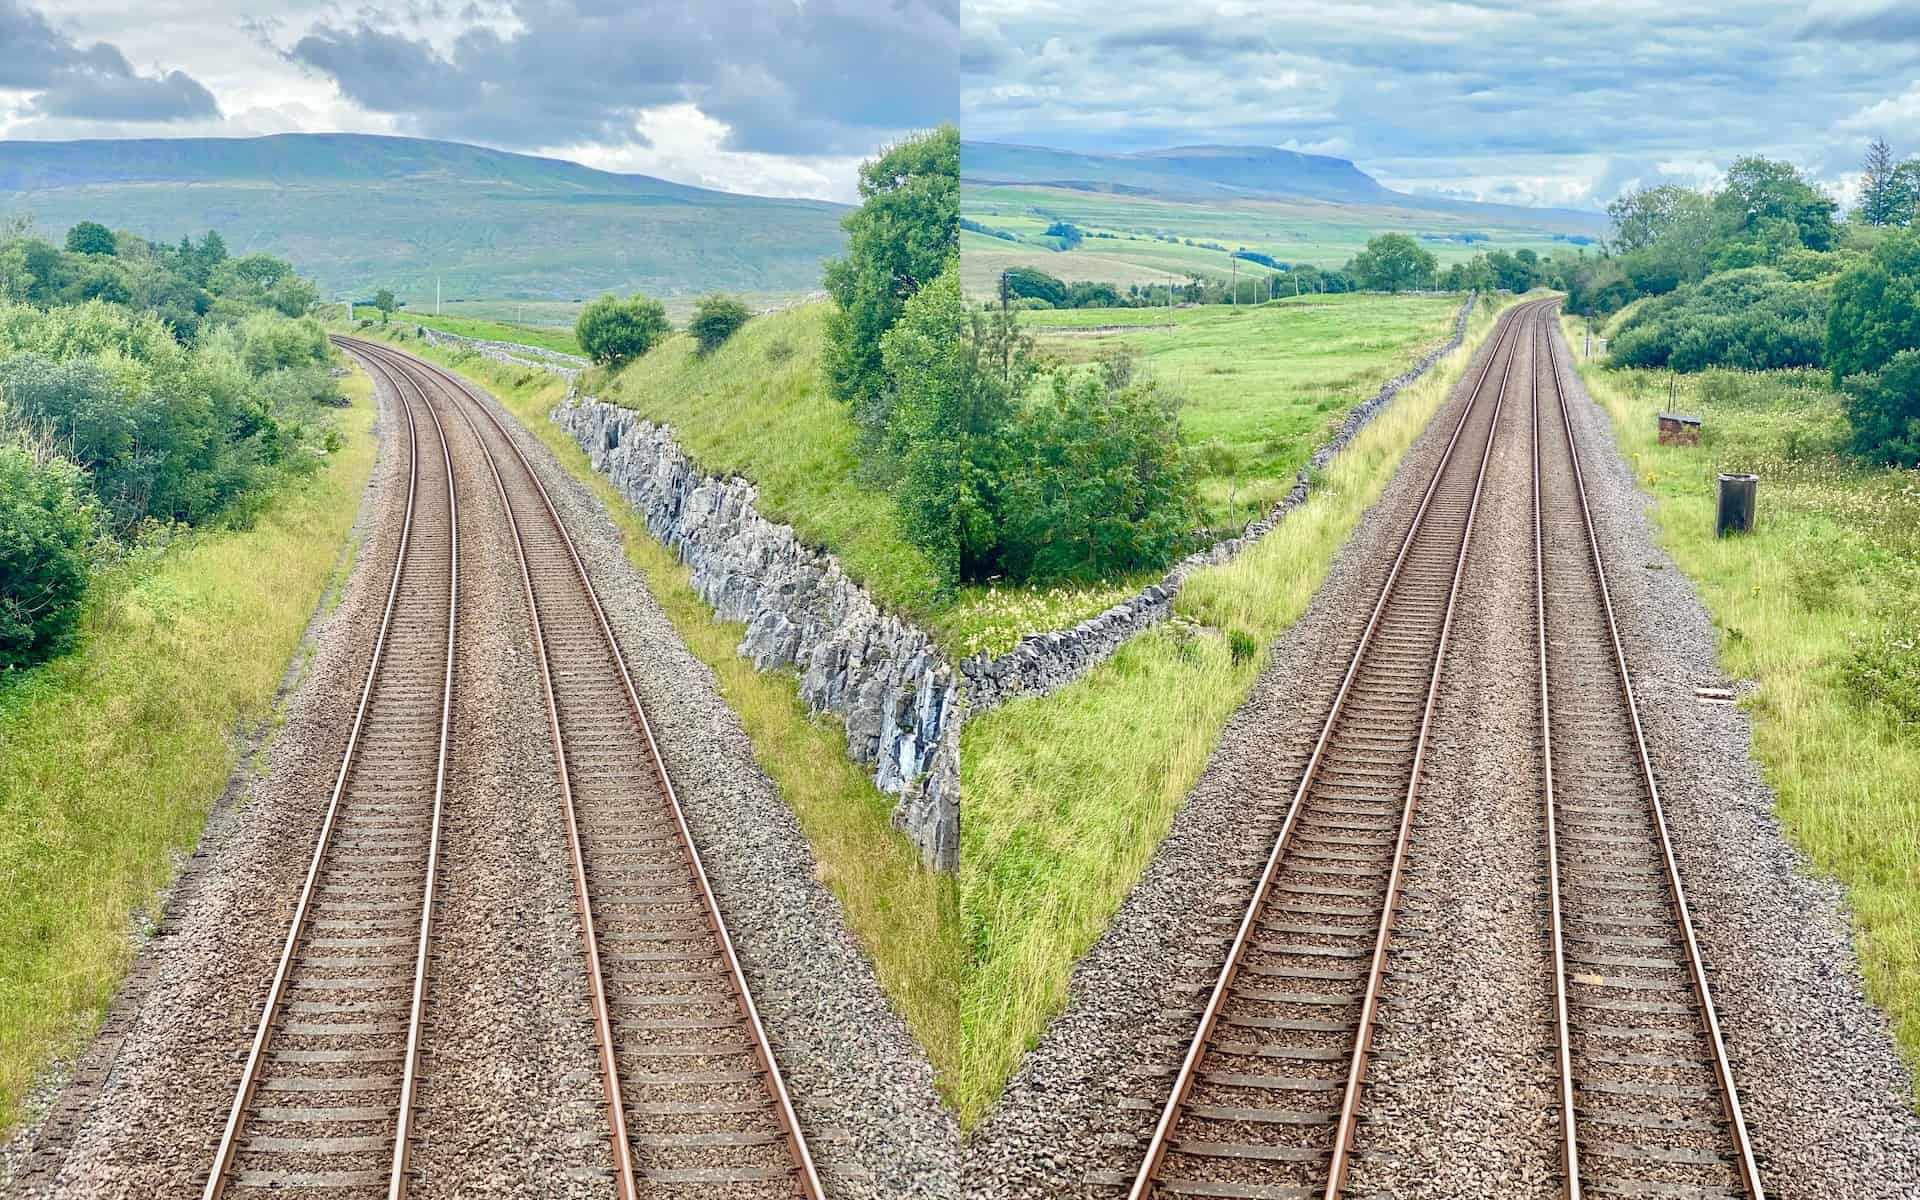 A lovely bridge connects Gauber Road and Colt Park, crossing the Settle to Carlisle Railway in the Yorkshire Dales. When looking north-west, the line directs one's gaze towards the majestic mountain of Whernside. Conversely, looking south-east leads the eye to the striking mountain of Pen-y-ghent.